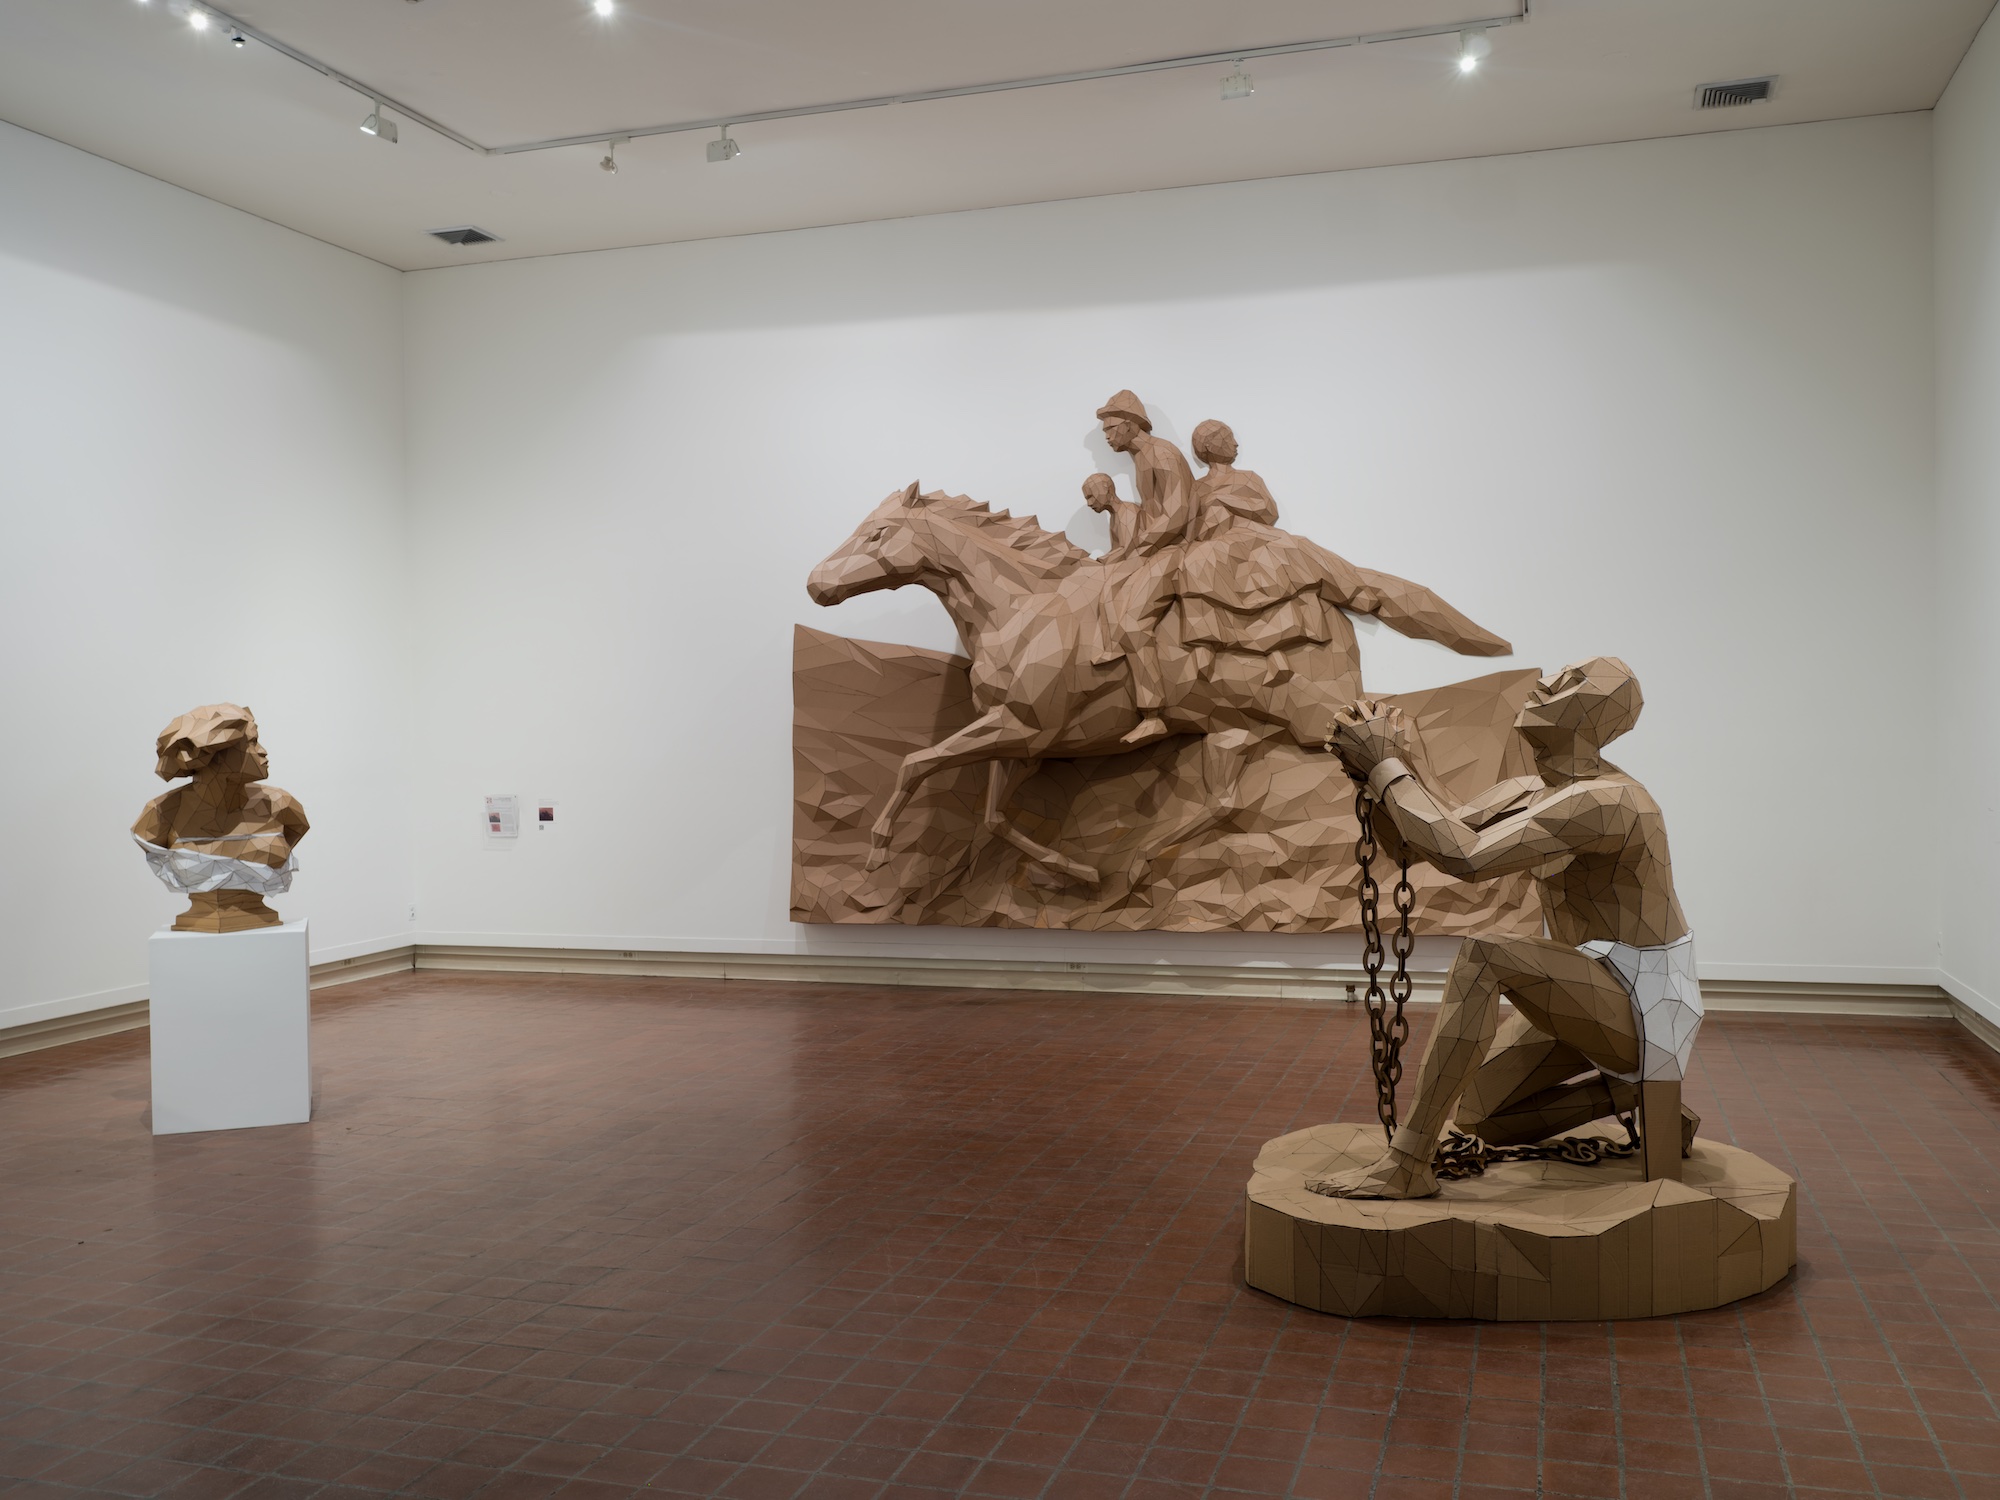 Three sculptures of cardboard depicting a a chained slave pleading upwards, the bust of a woman, and people riding upon a horse.